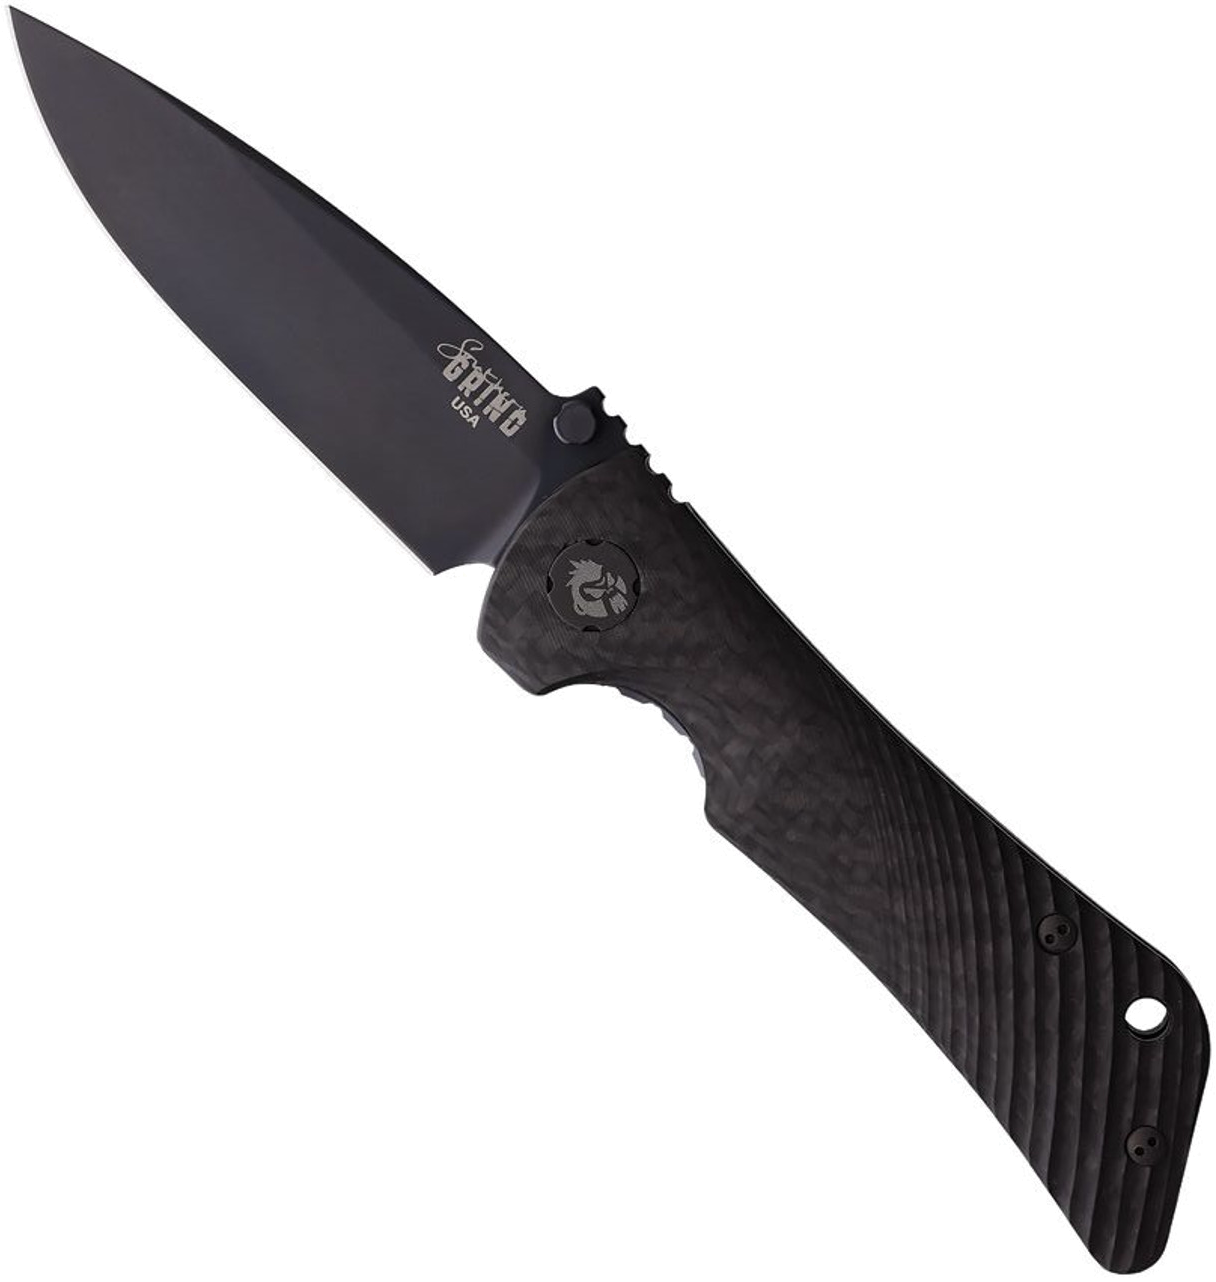 product image for Southern Grind Spider Monkey CF Magna Cut SG 22266